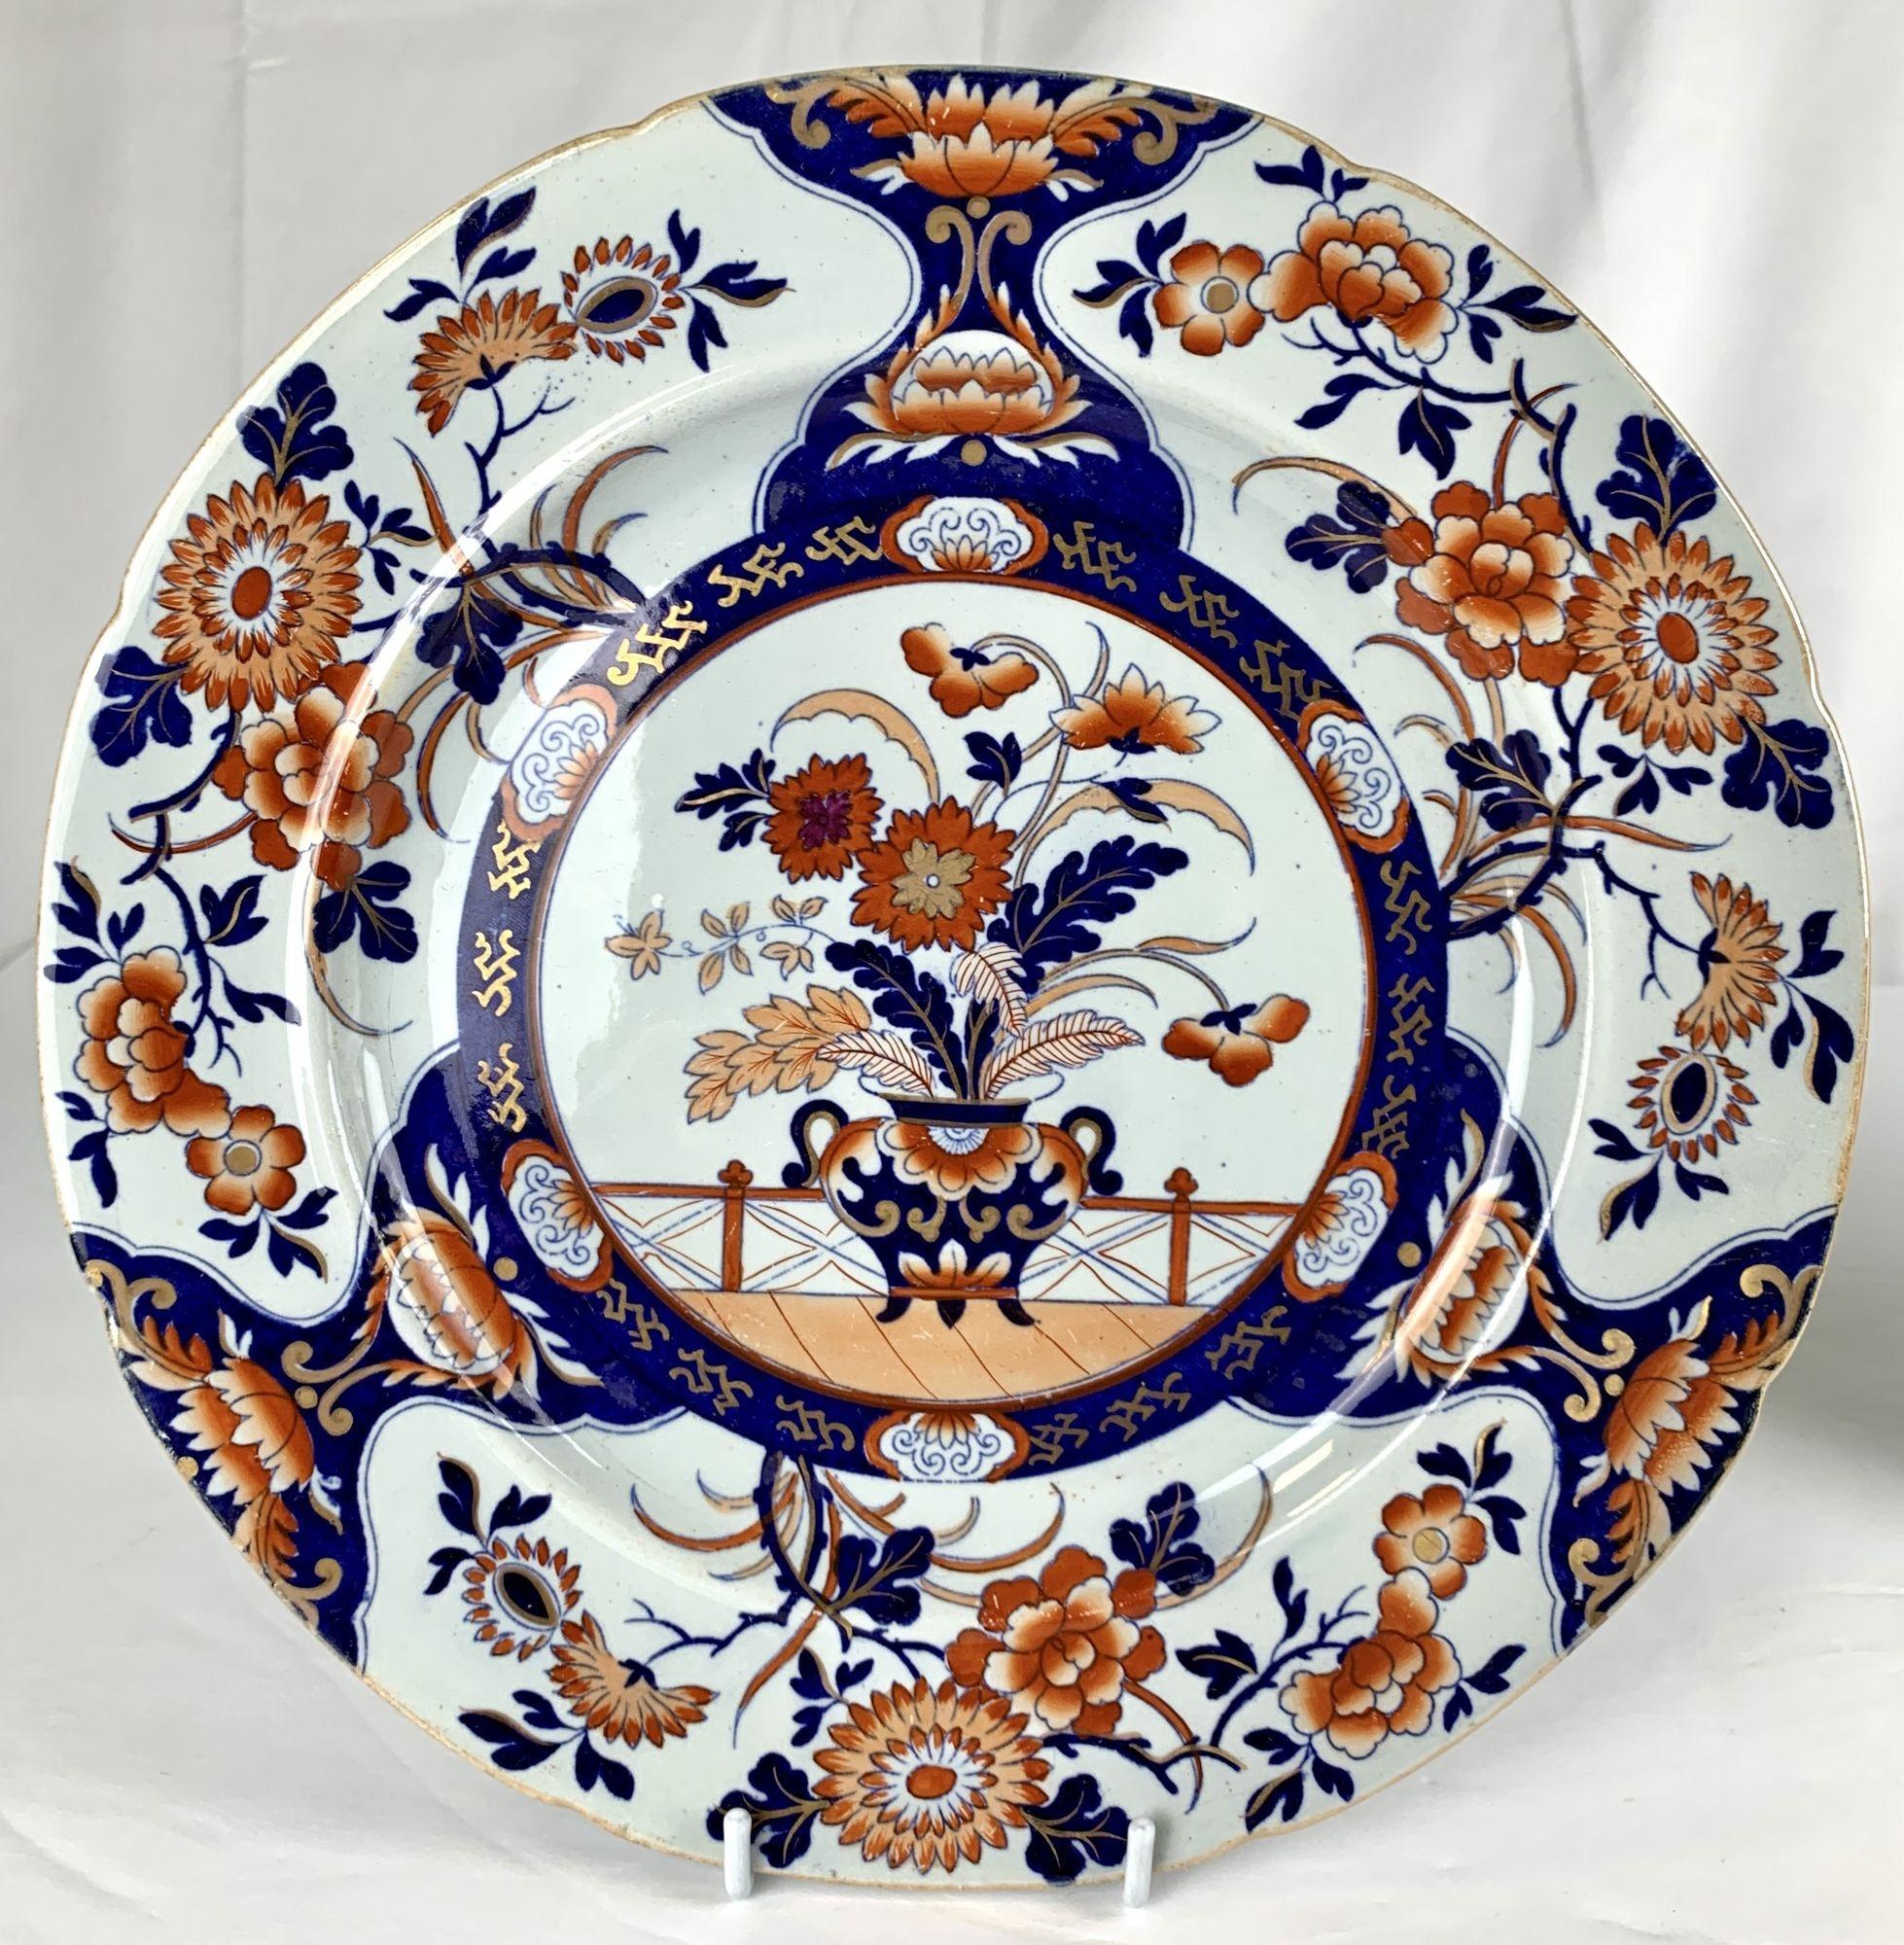 This exquisite set of Imari plates: a dozen dinner plates, a dozen salad or luncheon plates, and a dozen bread and butter plates are all decorated in a beautiful English Imari pattern.
The plates measure in diameter: dinner 10.25